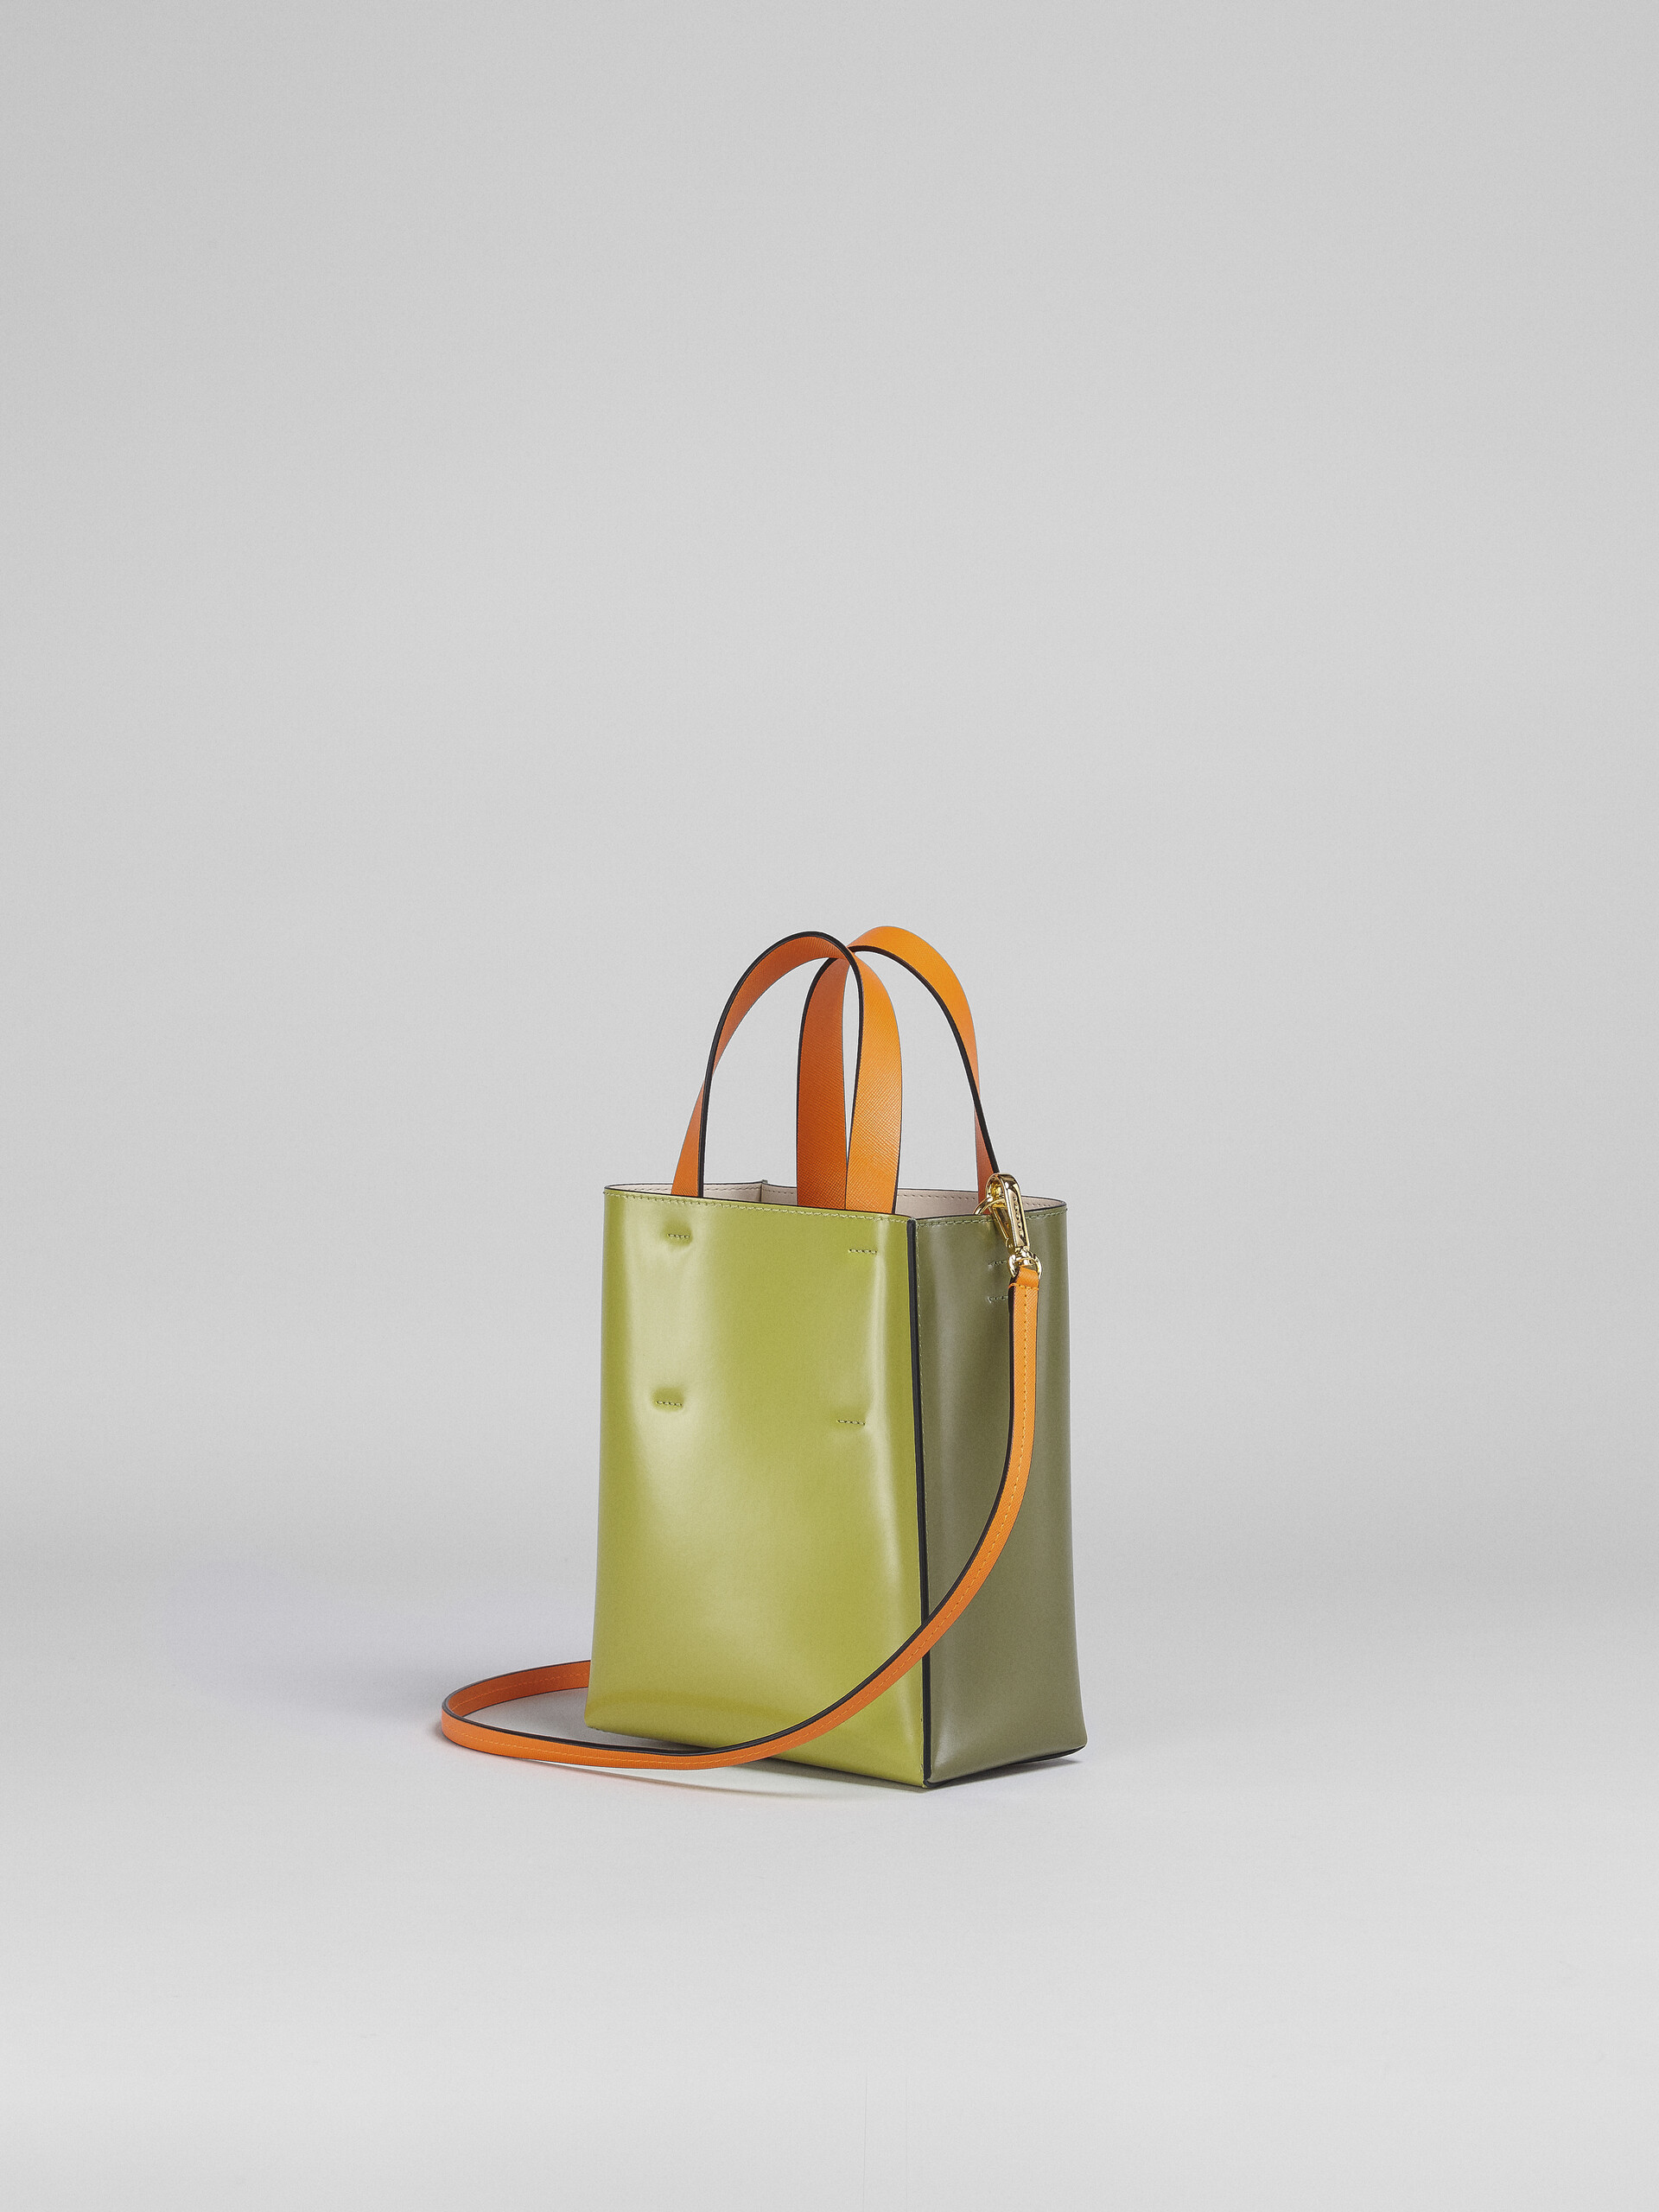 MUSEO mini bag in green leather - Shopping Bags - Image 2